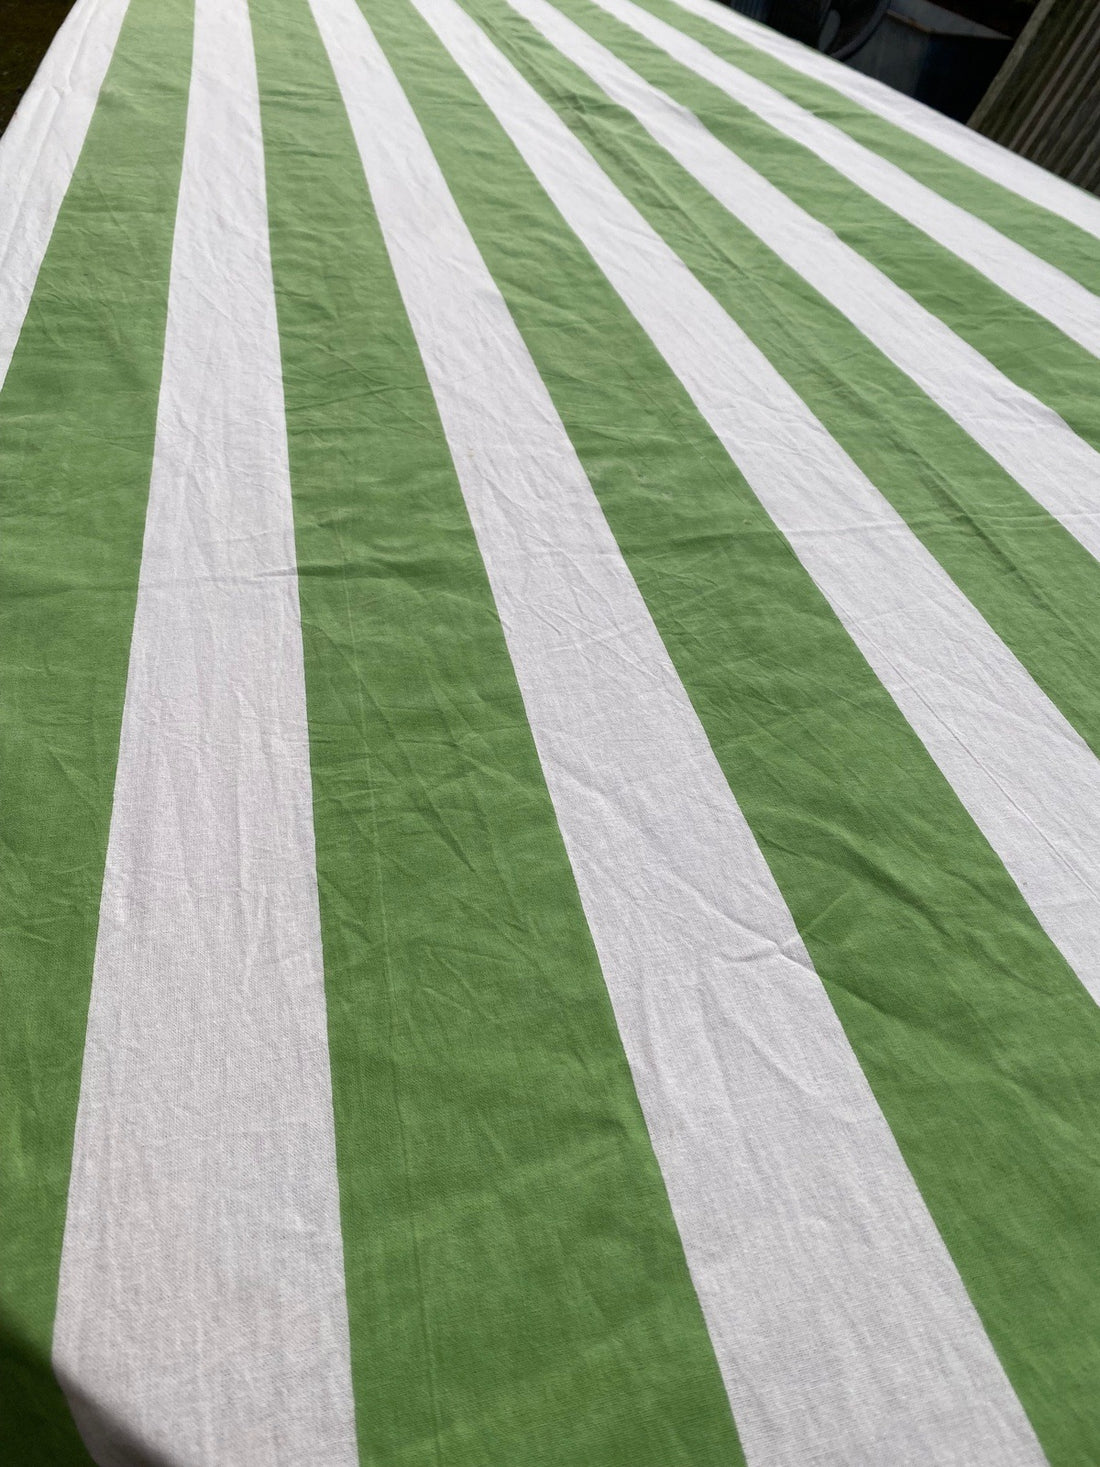 Indian Block Print Tablecloth - Pale Green and White stripe